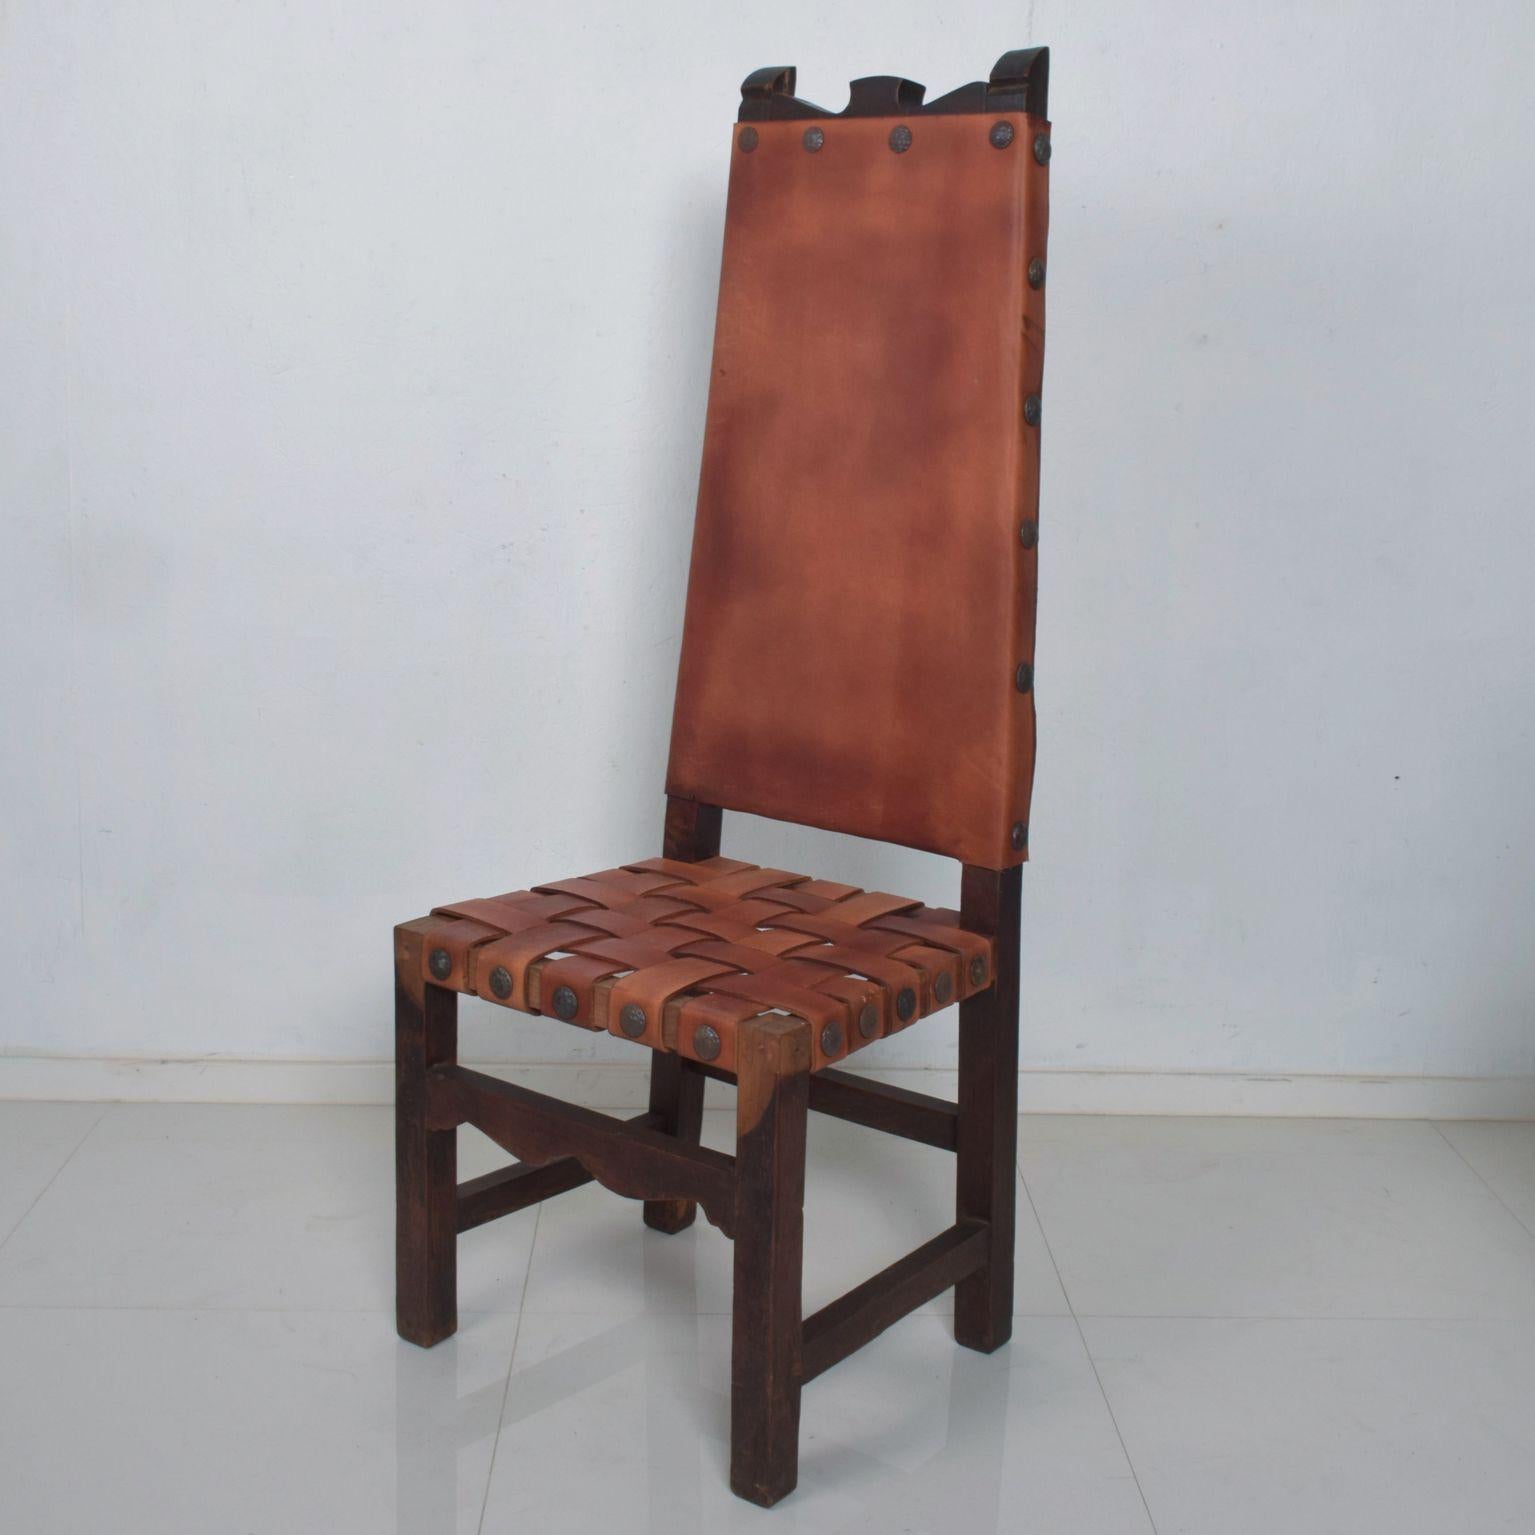 SPANISH Colonial TALL Wood Chairs Woven Saddle Leather style Luis BARRAGAN 1